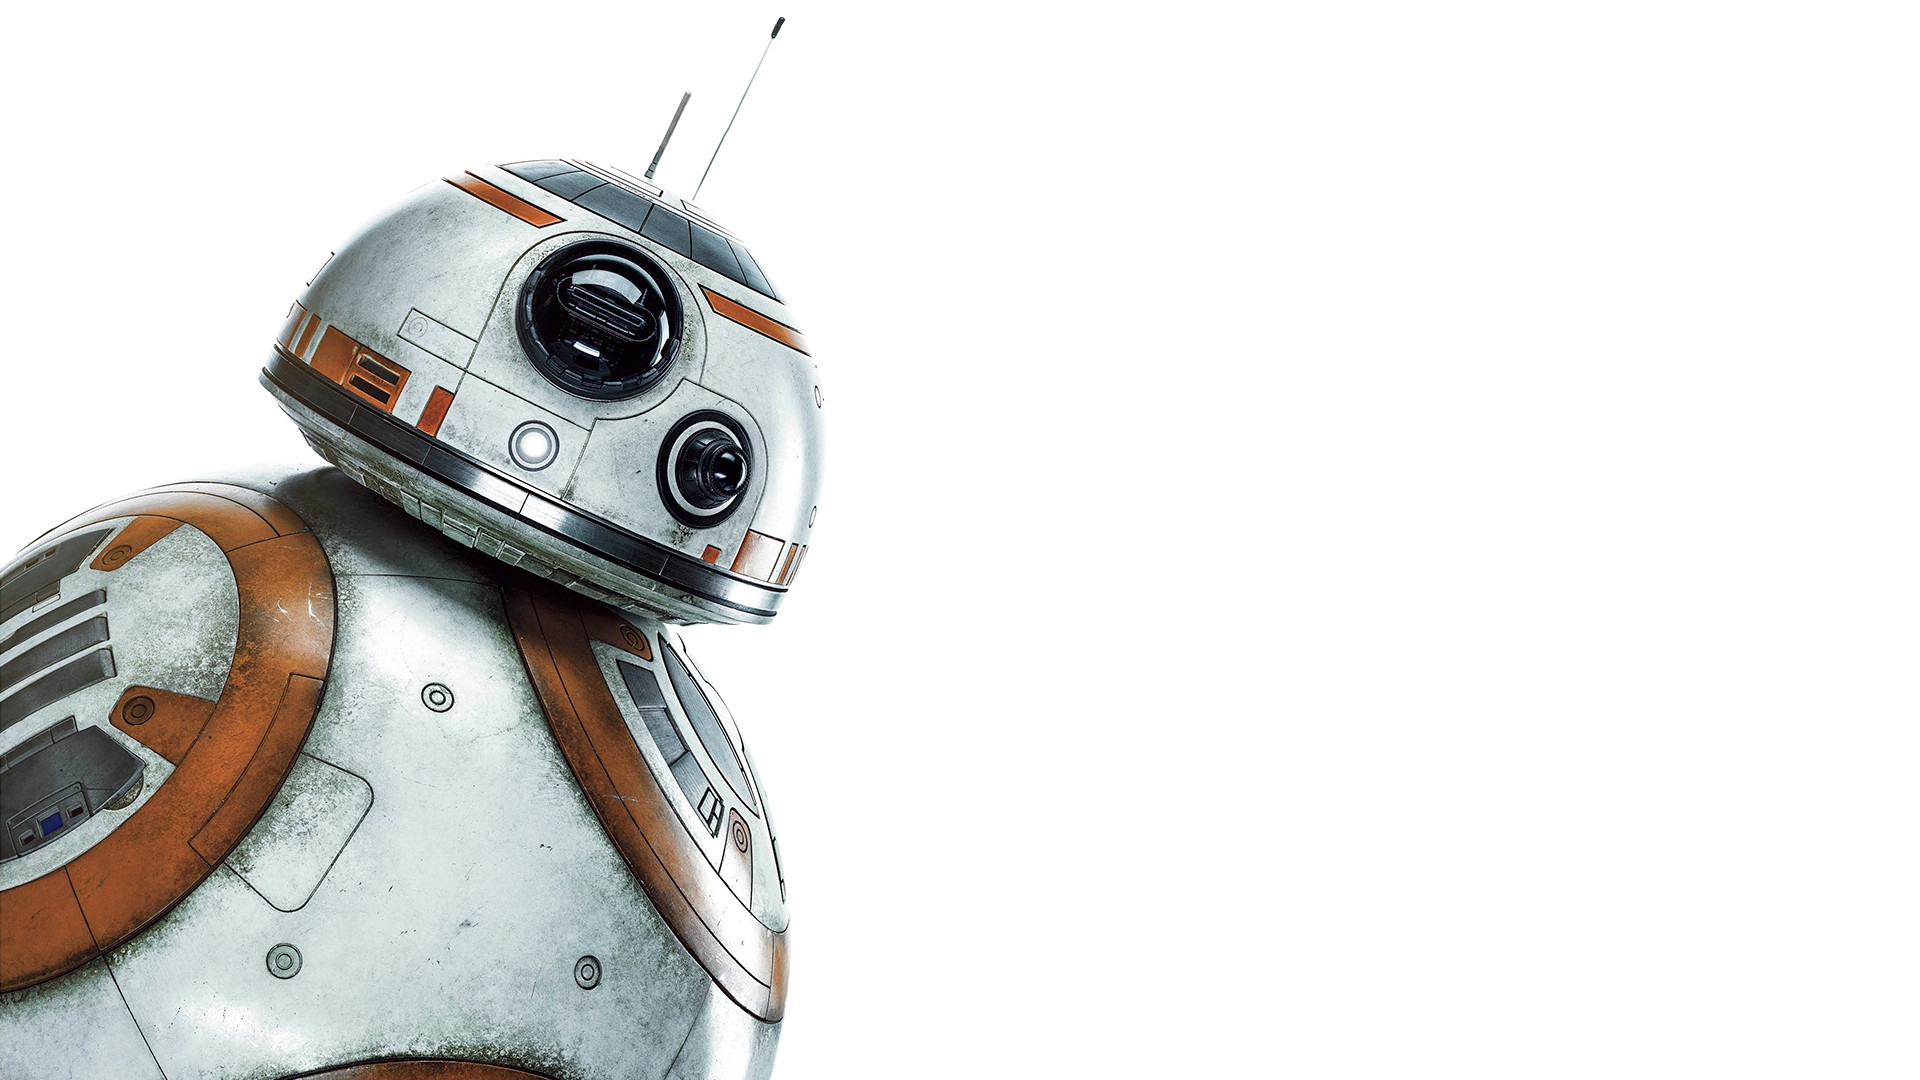 1920x1080 BB-8 Unit images wp8 HD wallpaper and background photos